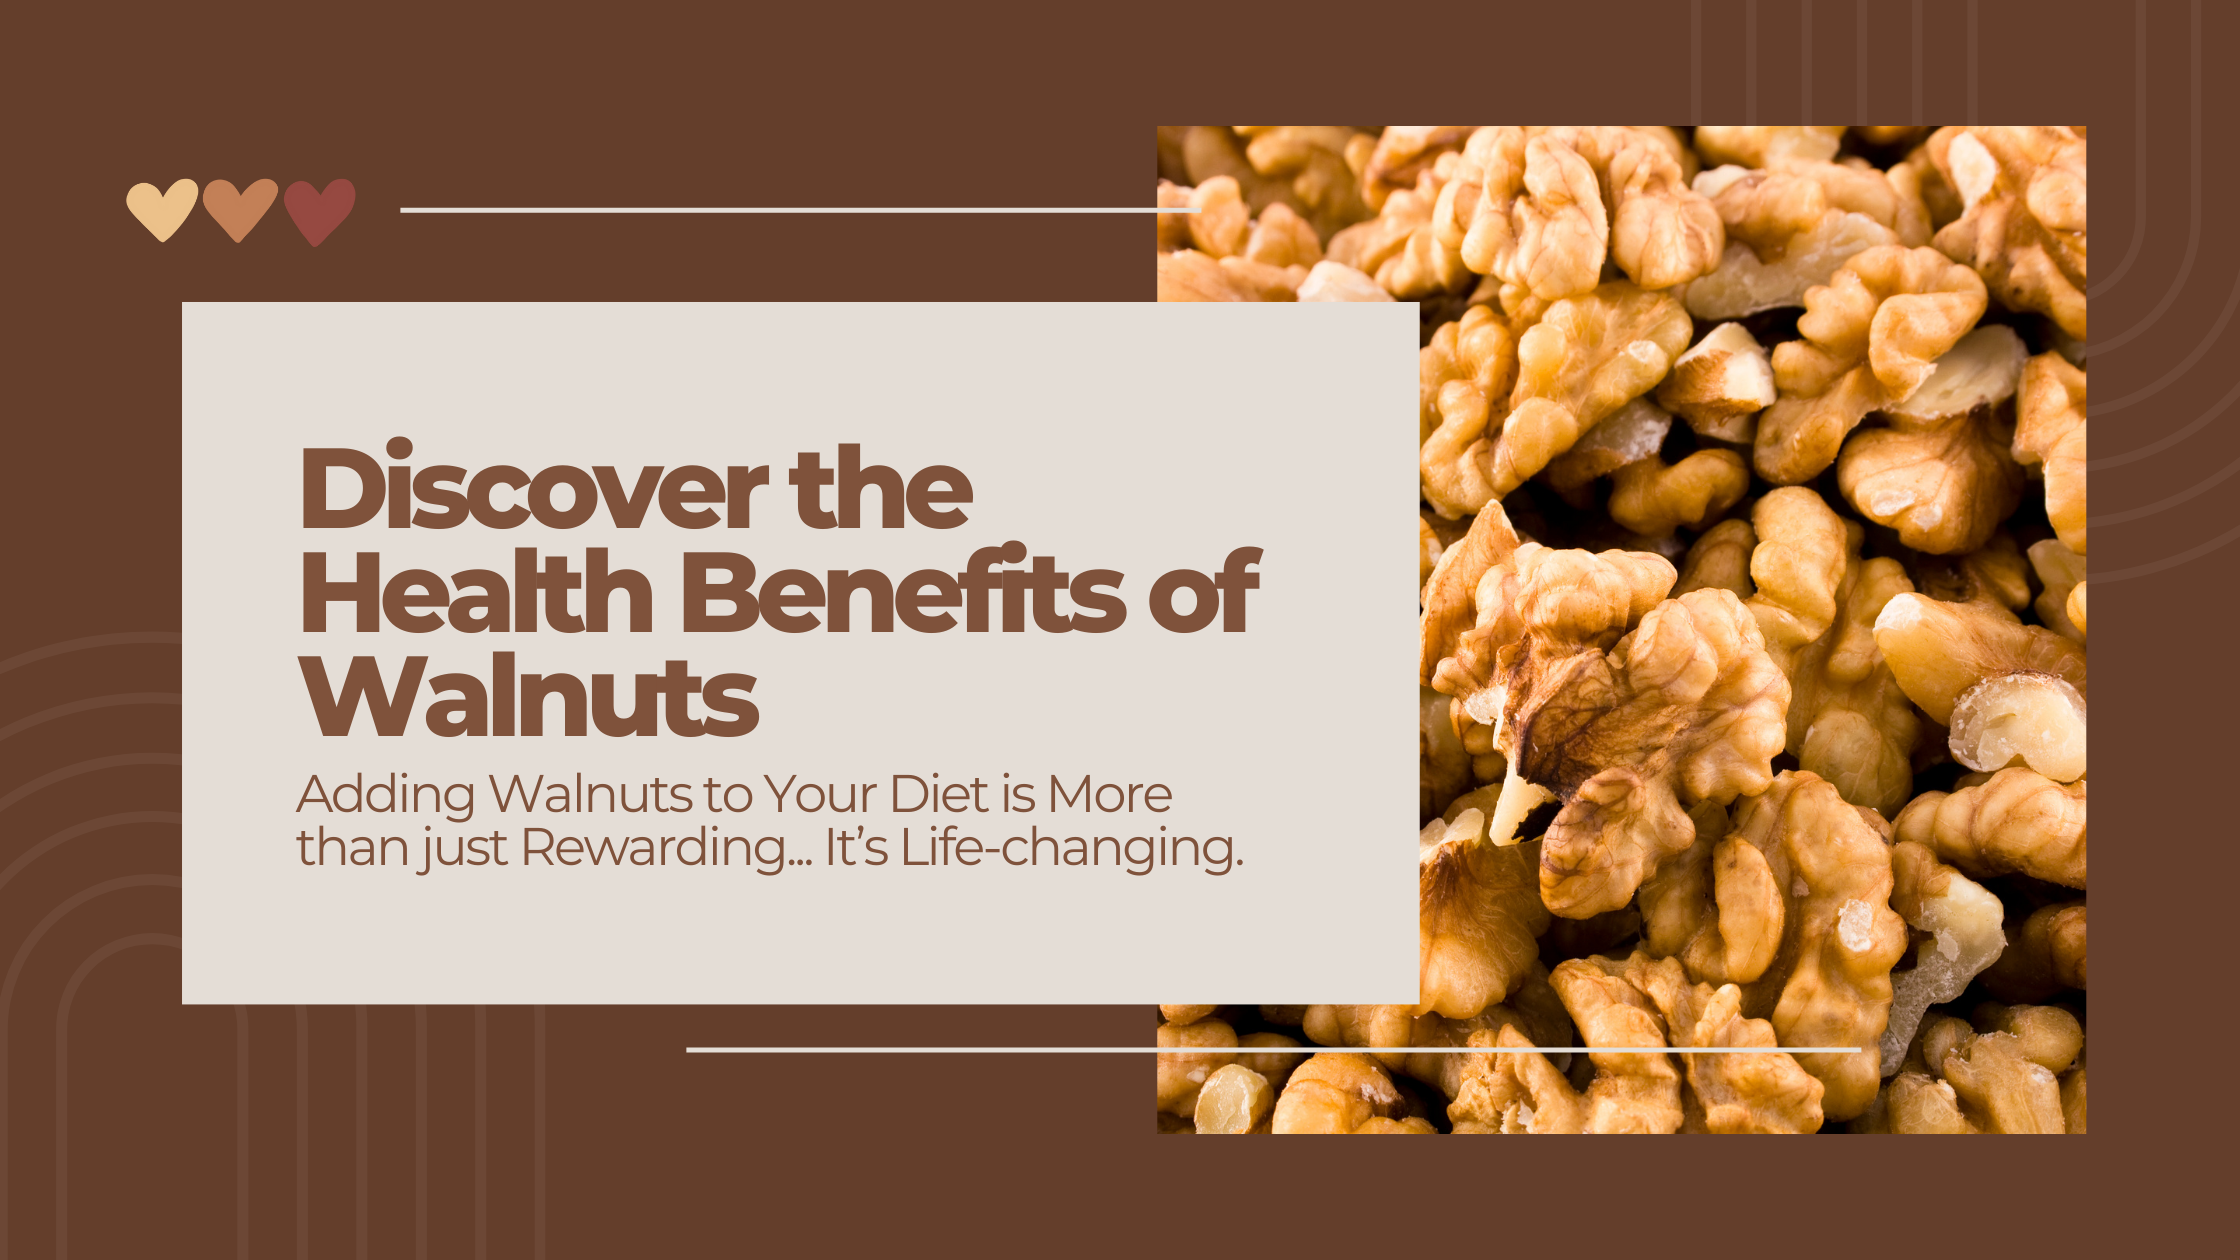 Discover the Health Benefits of Walnuts